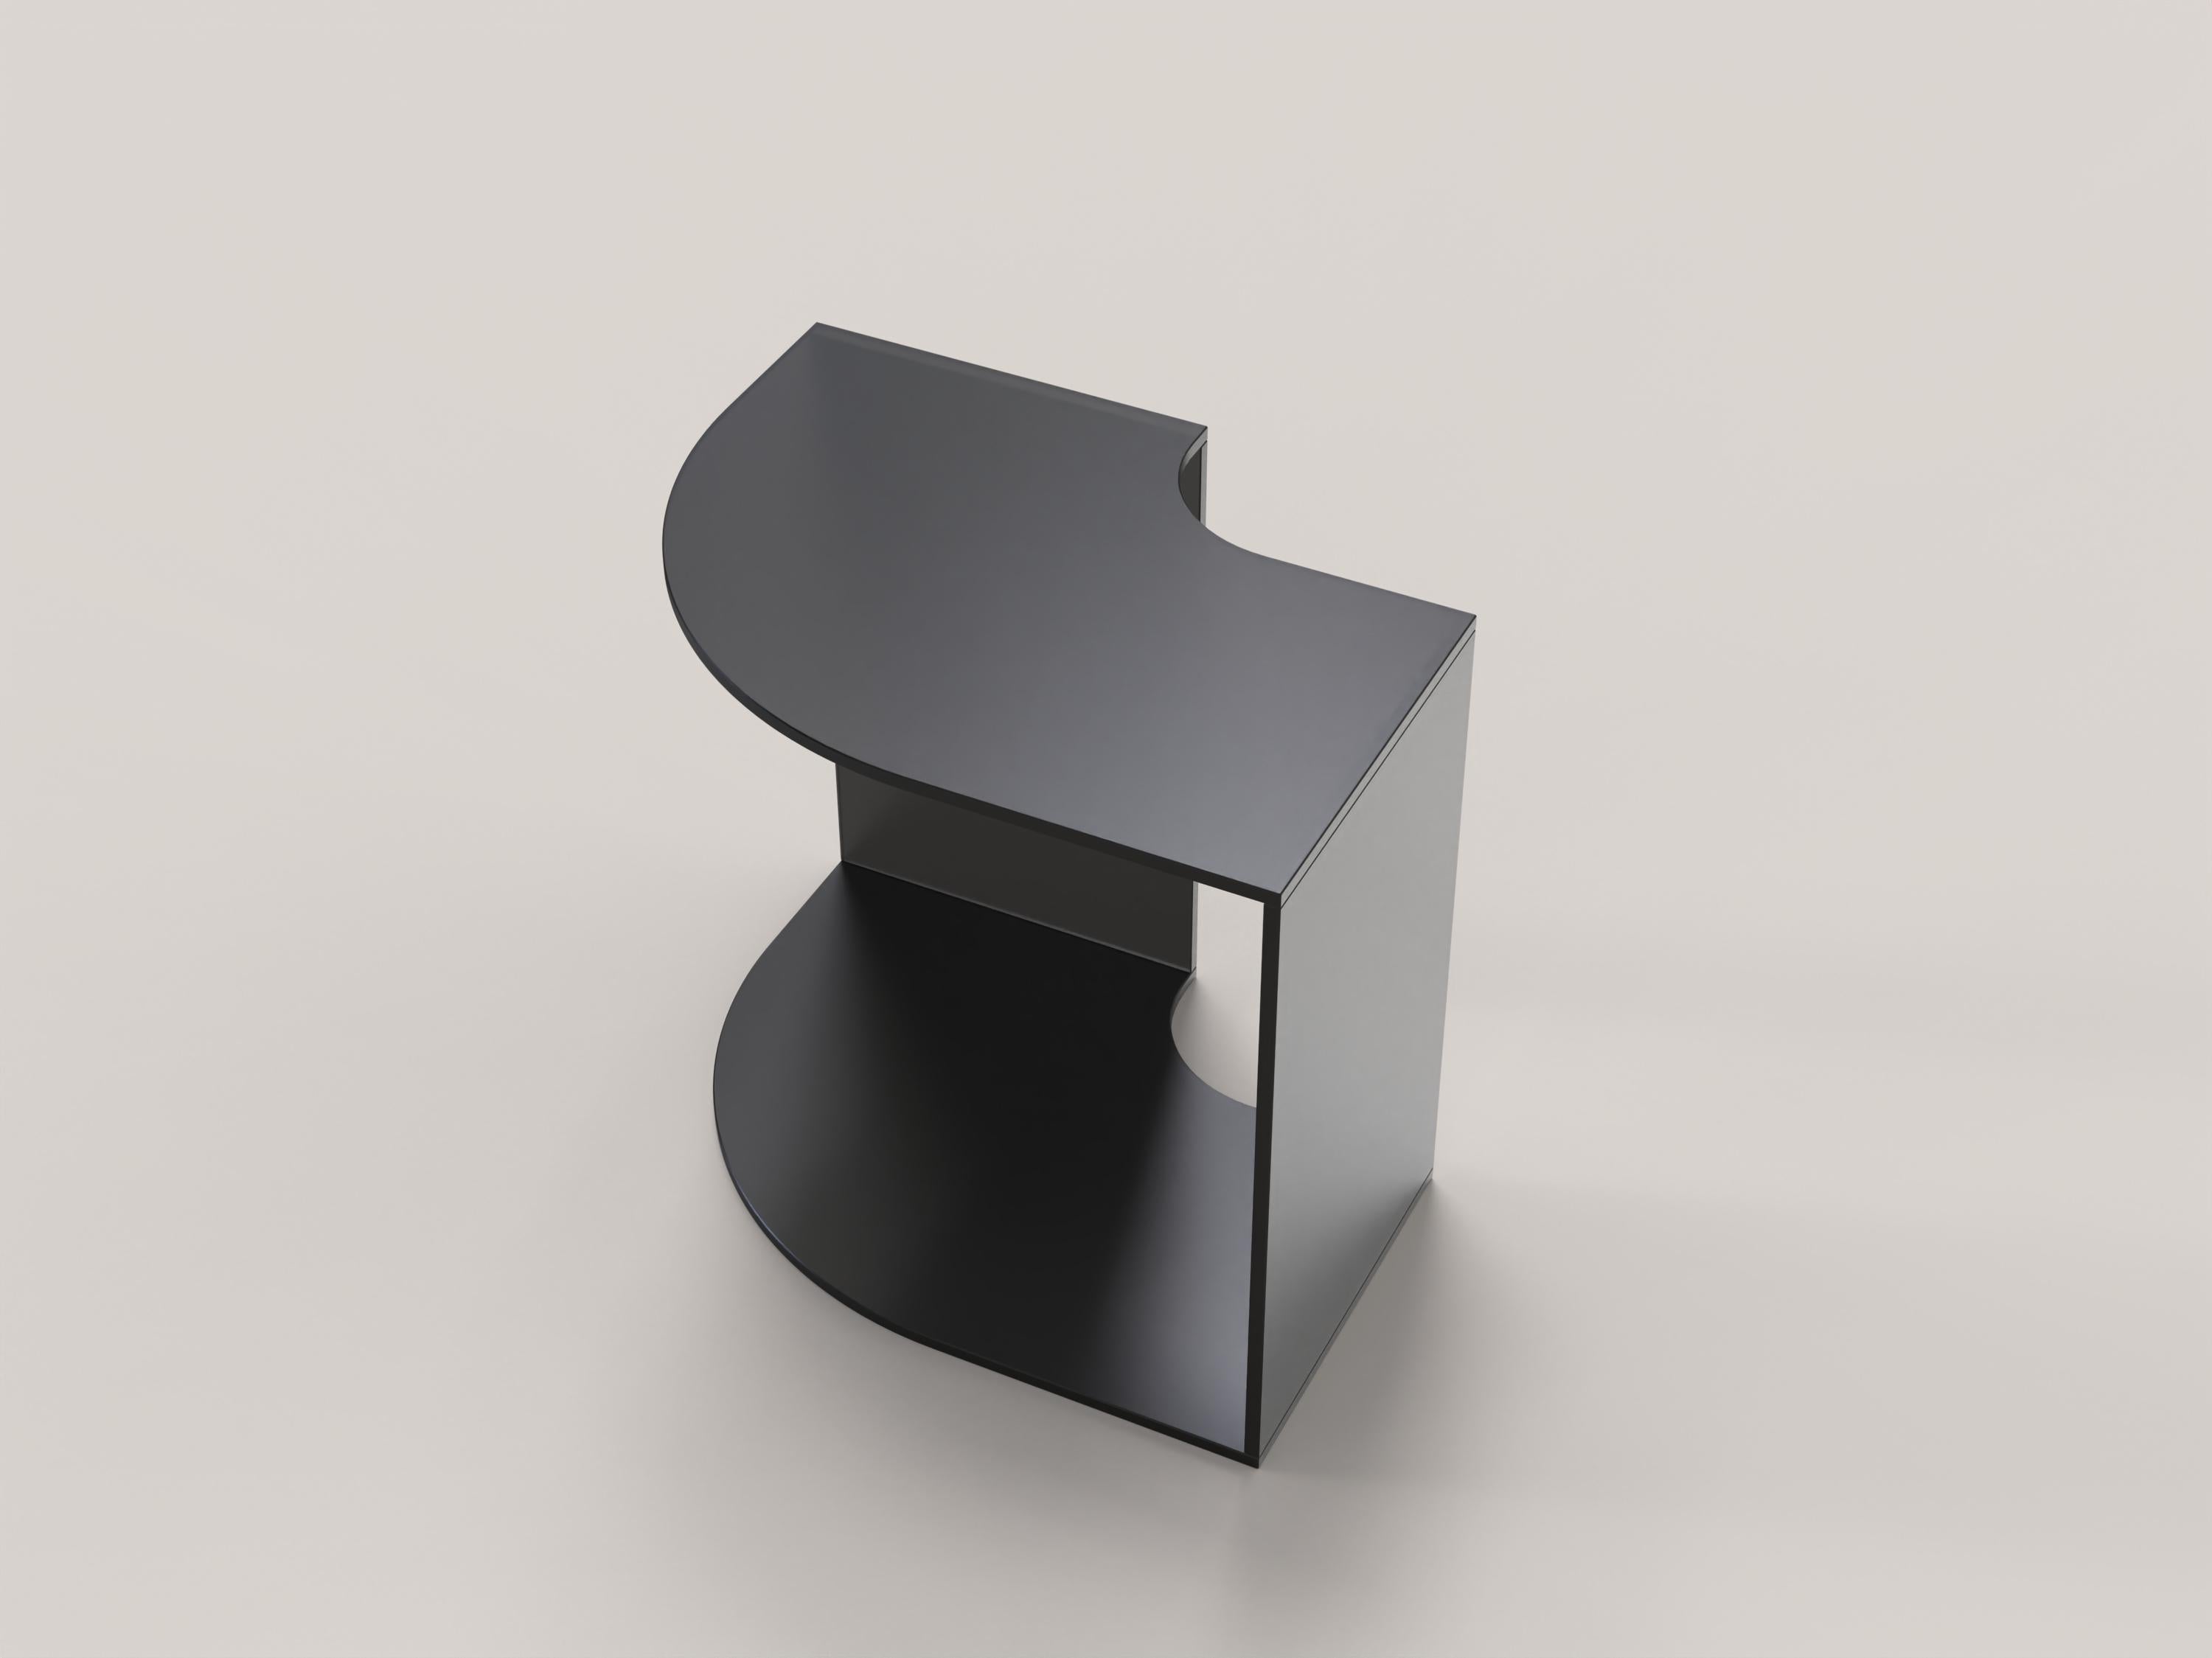 Quarter V1 is a 21st Century side table made by Italian artisans in satin black glass. The piece is manufactured in a limited edition of 1000 signed and progressively numbered examples. It is part of the collectible design language Quarter that has